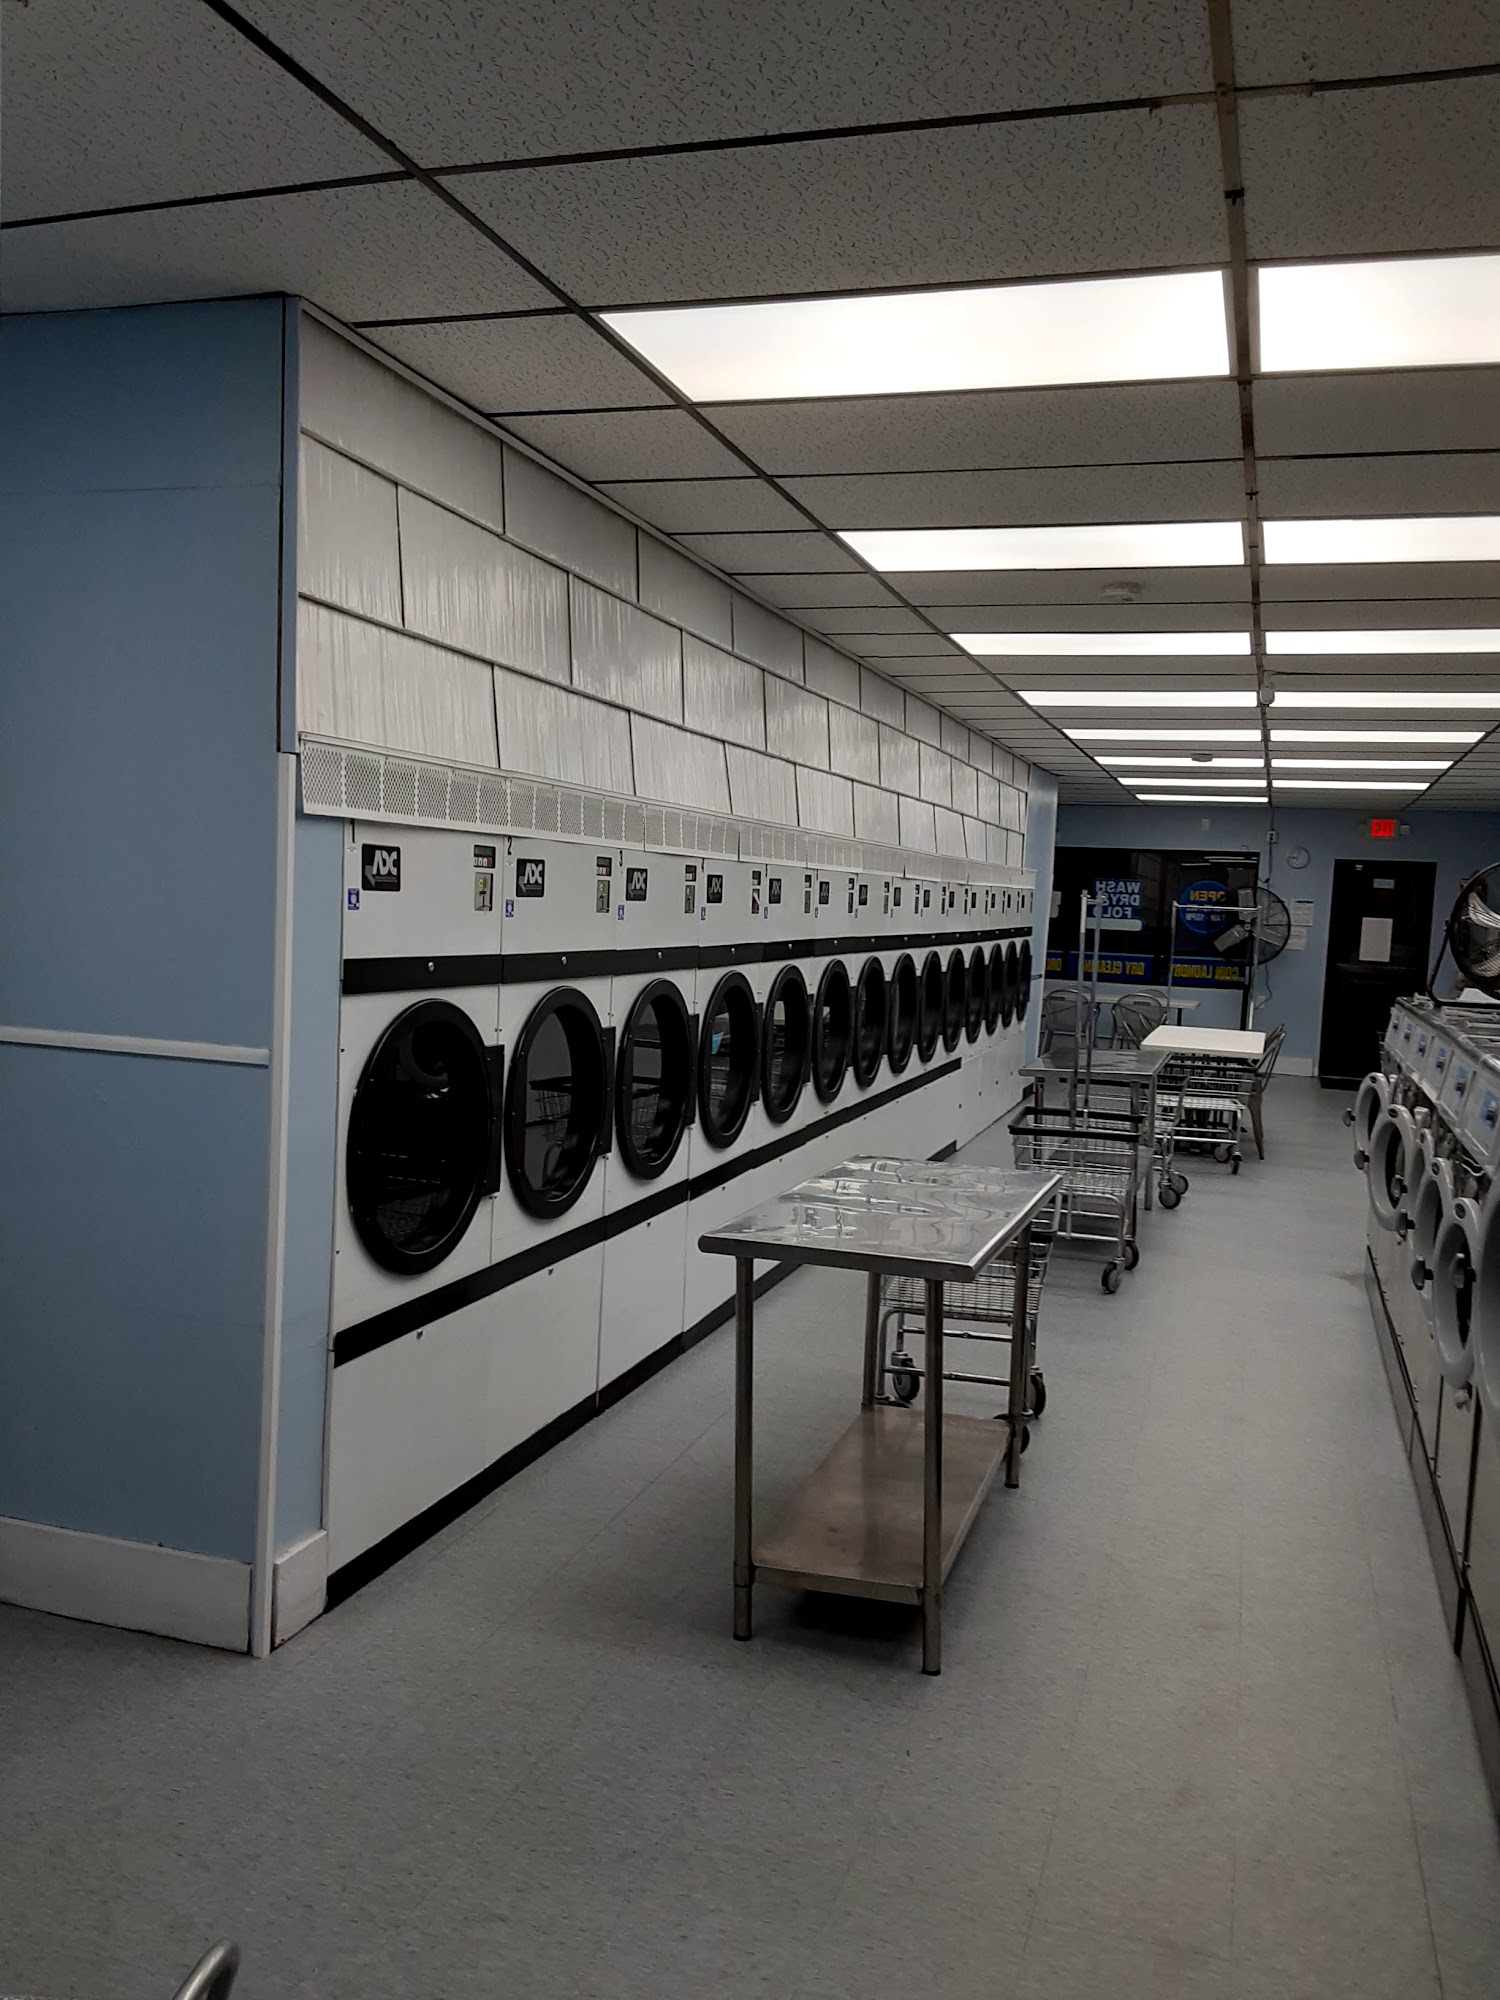 PISCATAWAY LAUNDROMAT AND DRY CLEANERS